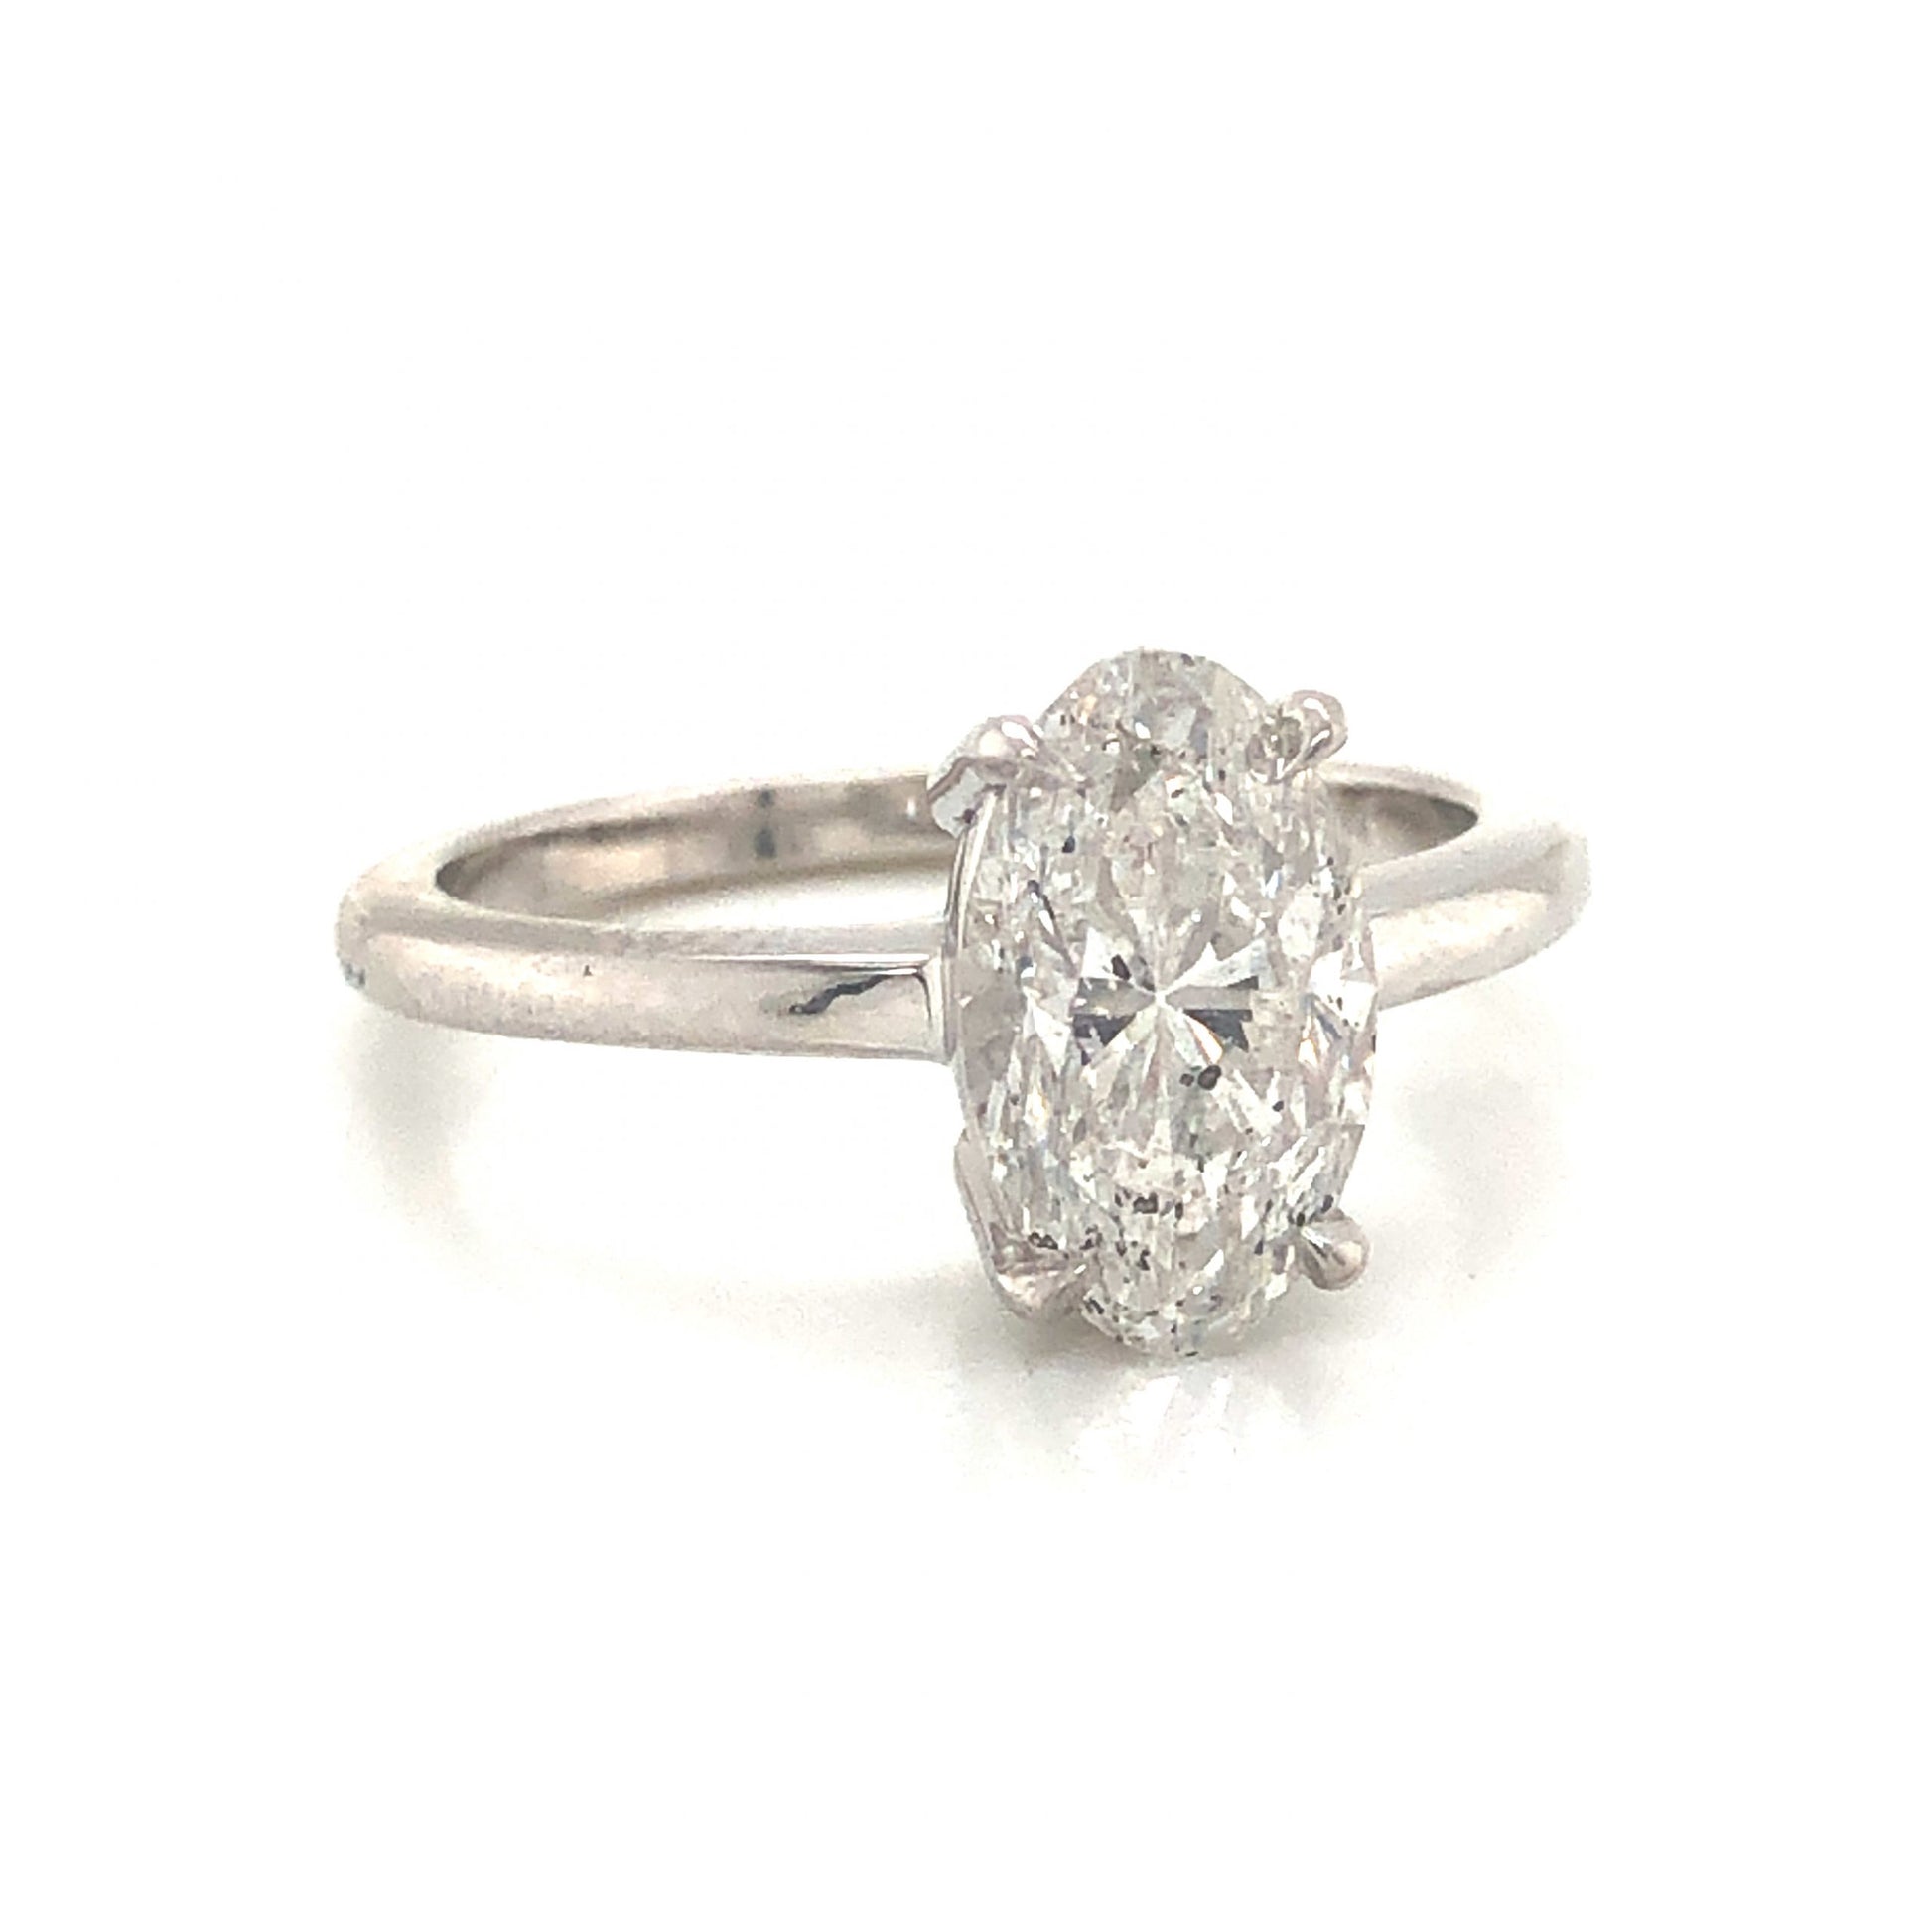 1.78 Oval Cut Diamond Engagement Ring in 14k White GoldComposition: Platinum Ring Size: 6 Total Diamond Weight: 1.78ct Total Gram Weight: 3.3 g Inscription: 14k
      